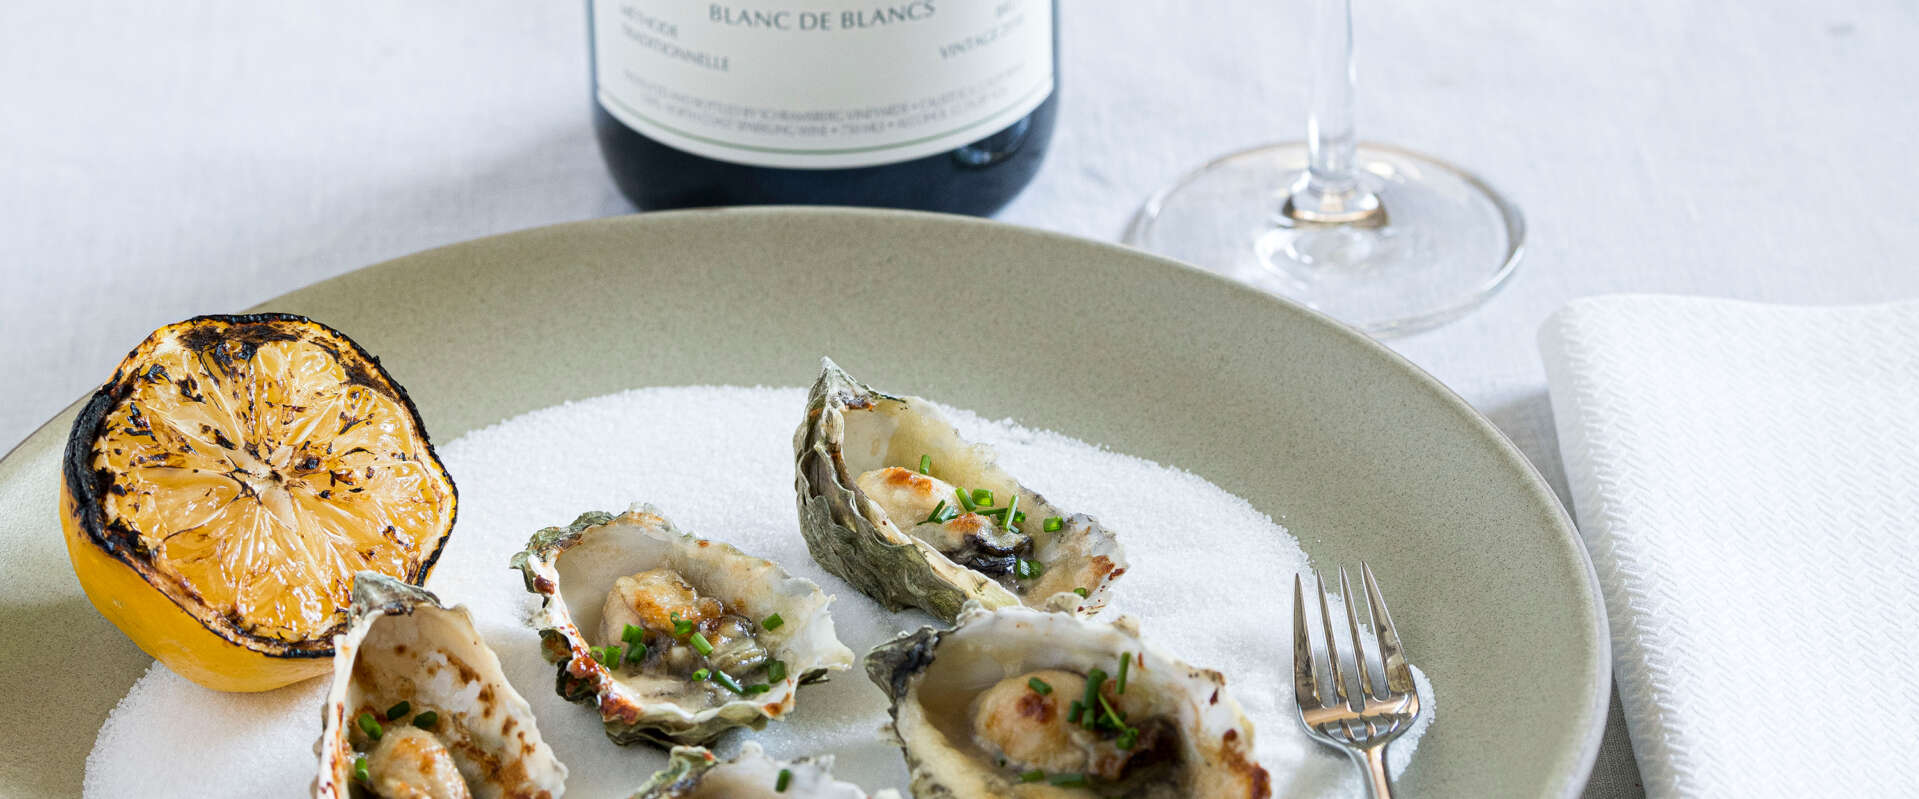 Blanc de Blancs paired with Spicy Buttered Oysteres on the Half Shell